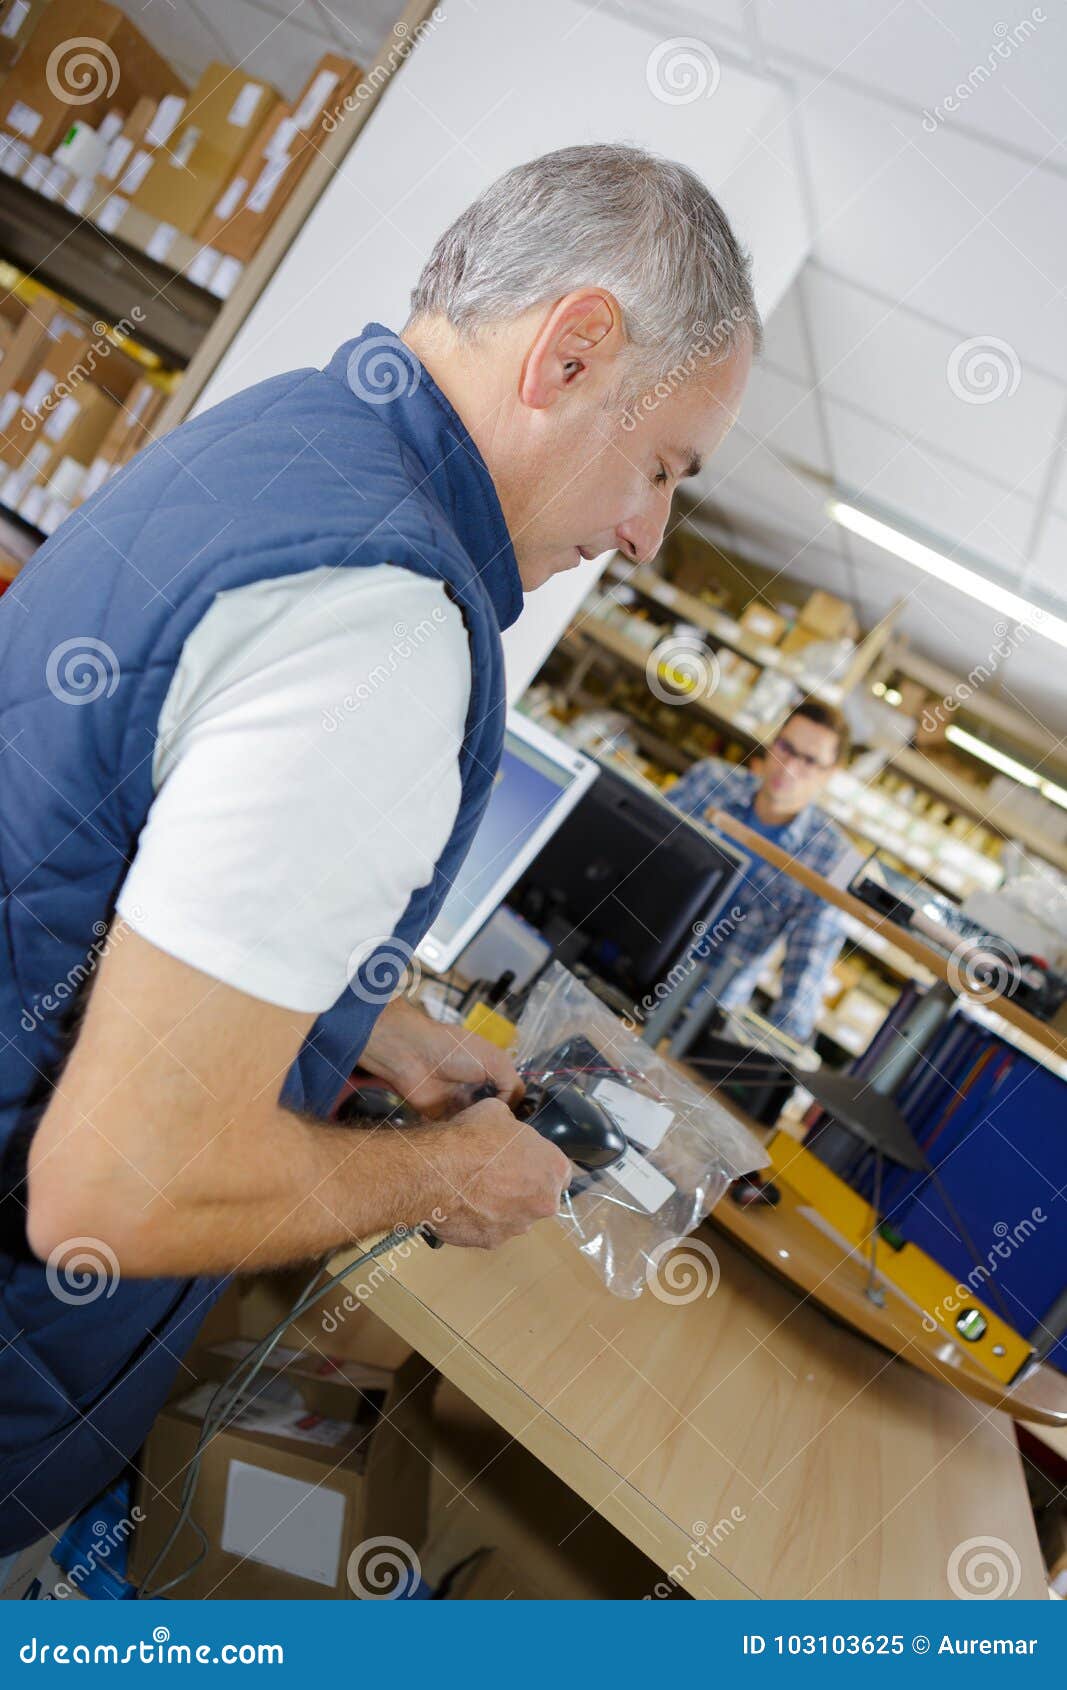 man scanning producto with handheld device